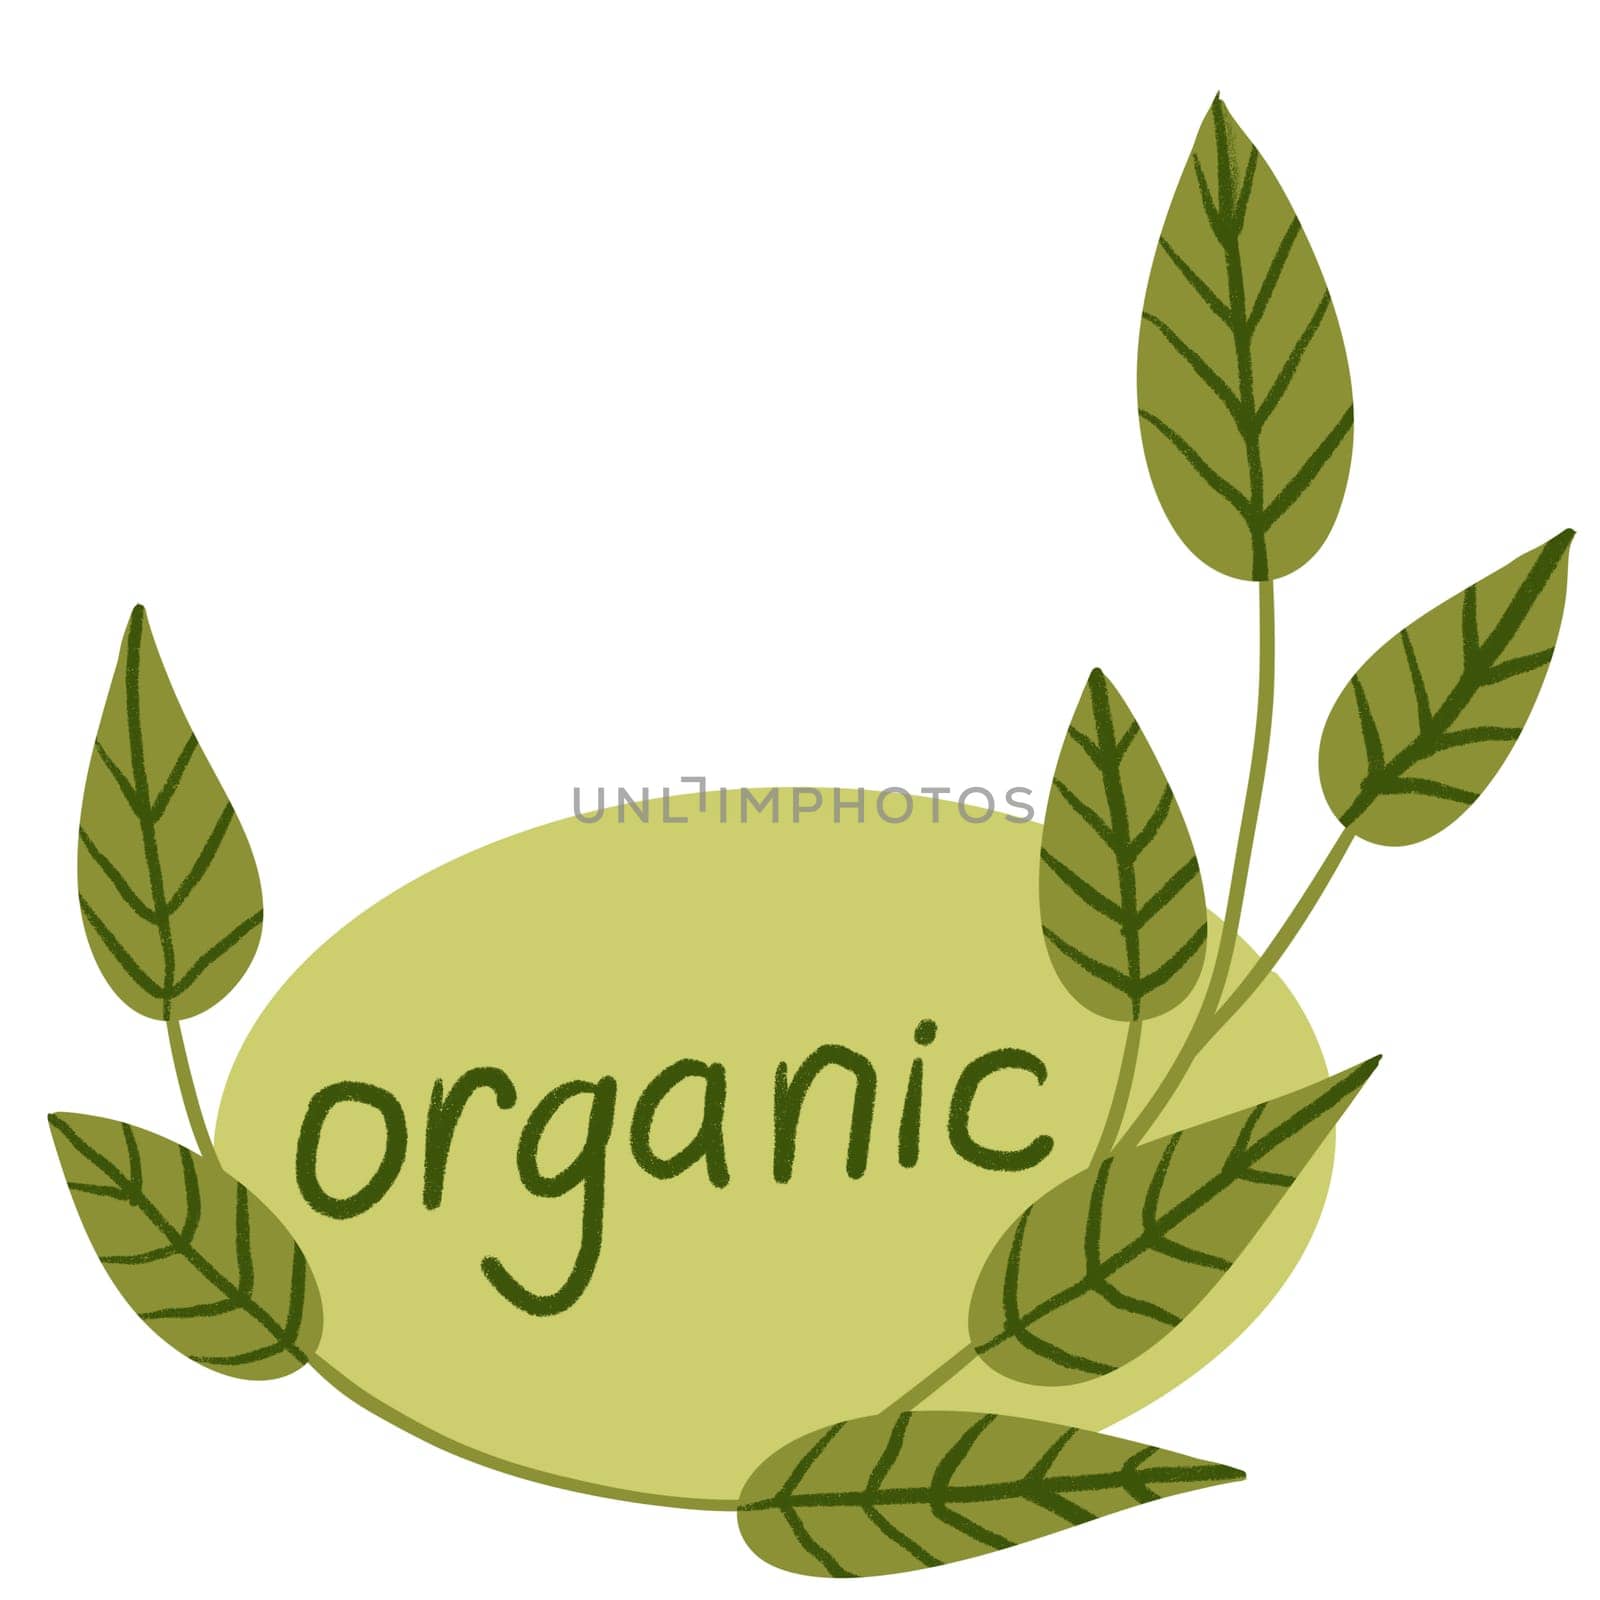 Hand drawn illustration of organic green label sticker with green leaves. Nature ecological environmental sign element, lime leaf branch, hand lettering words, farm market food